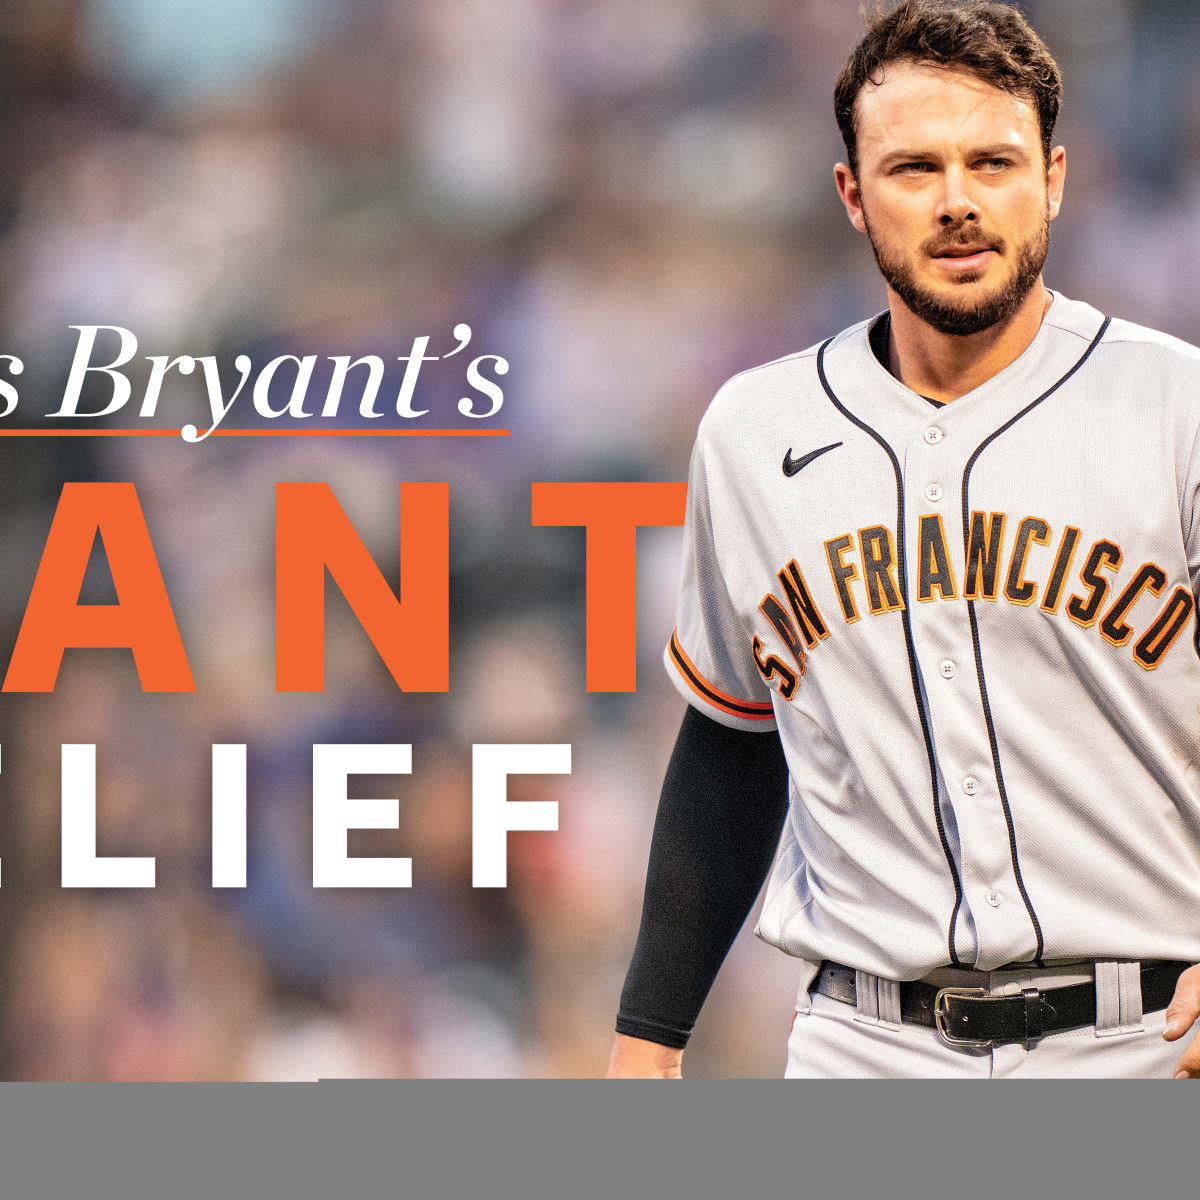 Chicago Cubs star Kris Bryant traded to San Francisco Giants